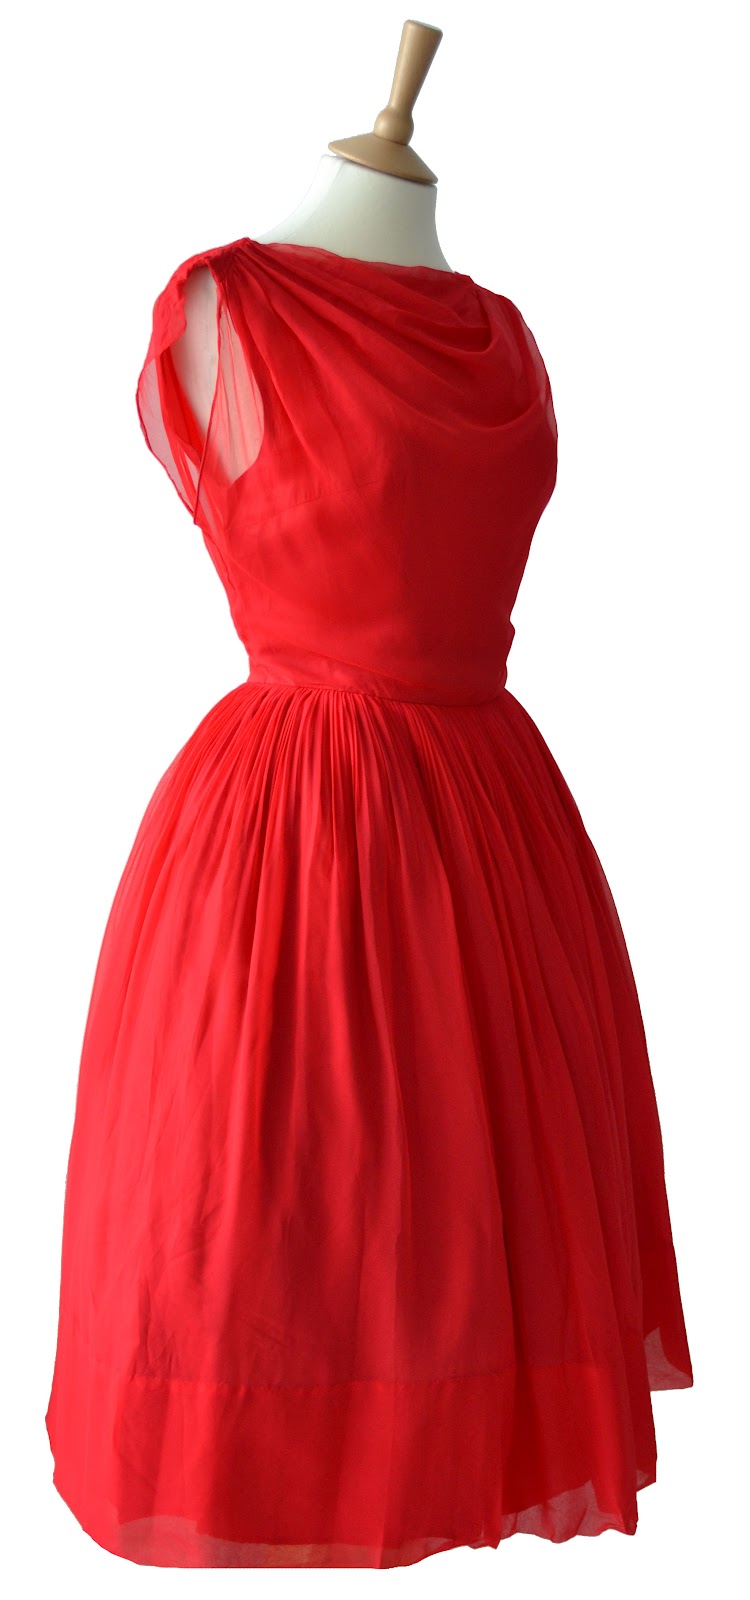 Just Added to NBVCC - 1950s Vintage Prom Dresses